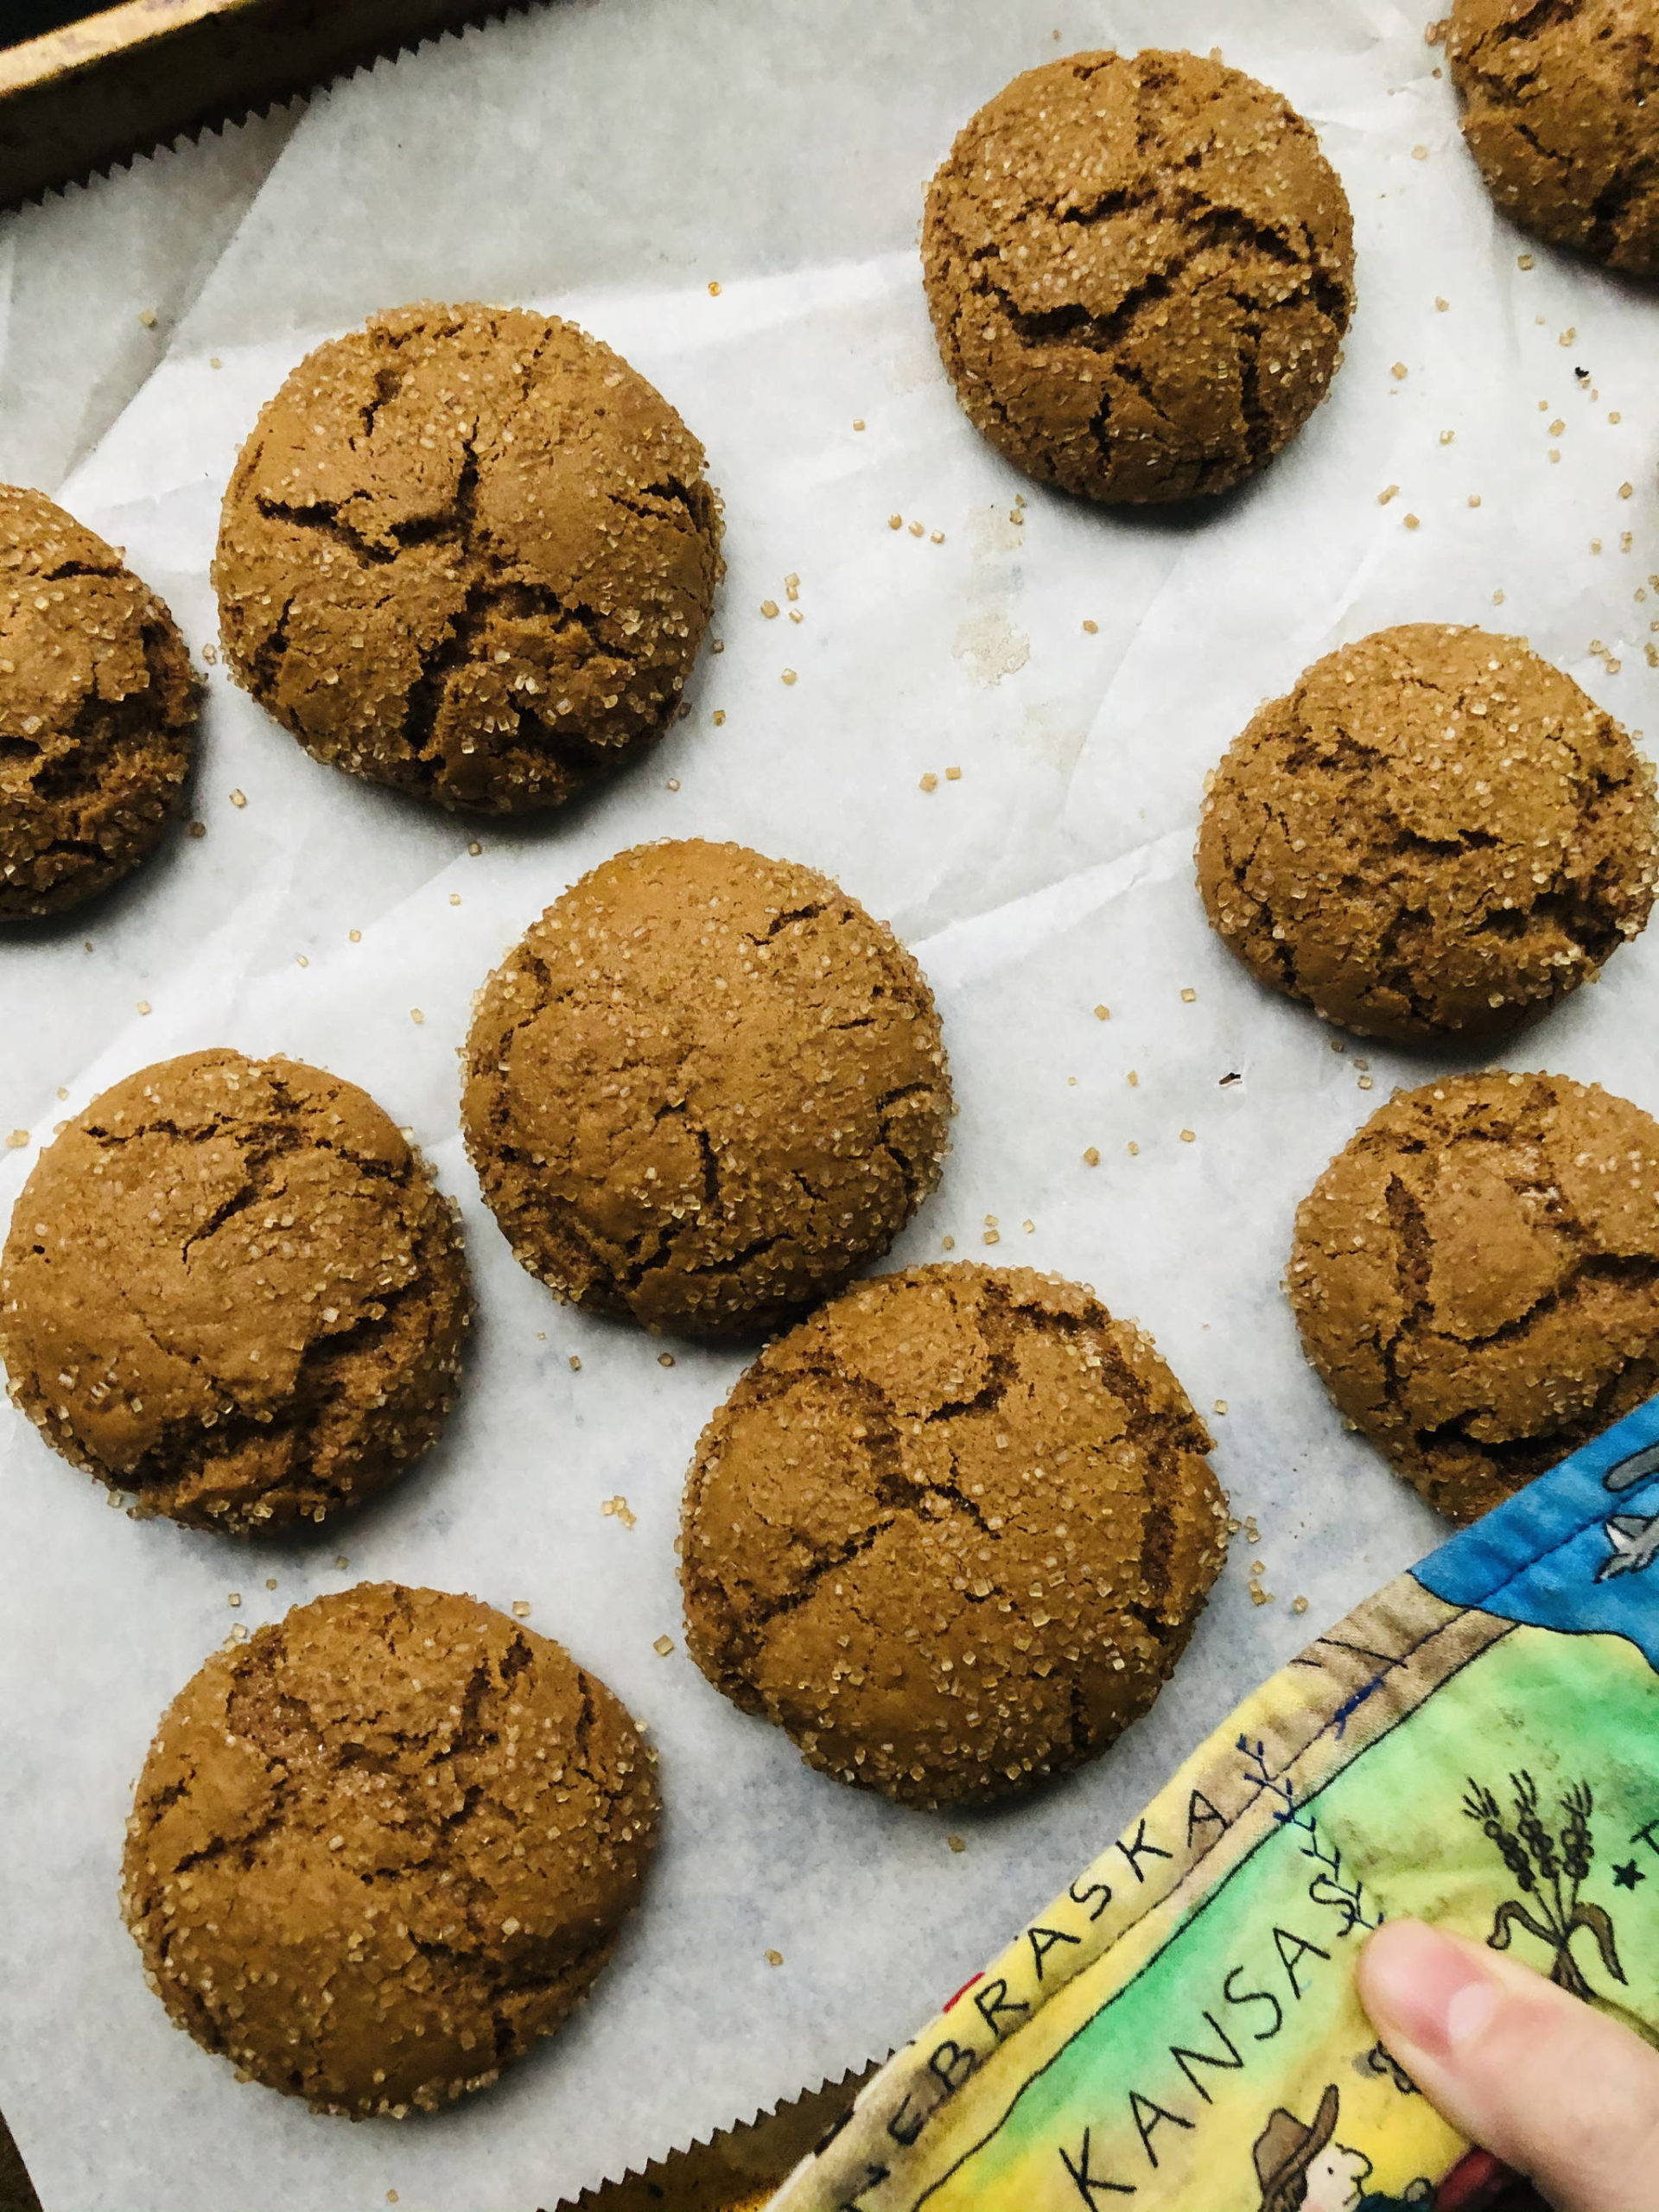 Photo by Victoria Petersen/Peninsula Clarion 
Ginger molasses cookies make for a delicious, chewy way to spread holiday cheer to family and friends isolated during the pandemic, photographed on Nov. 30, 2020, in Anchorage, Alaska.